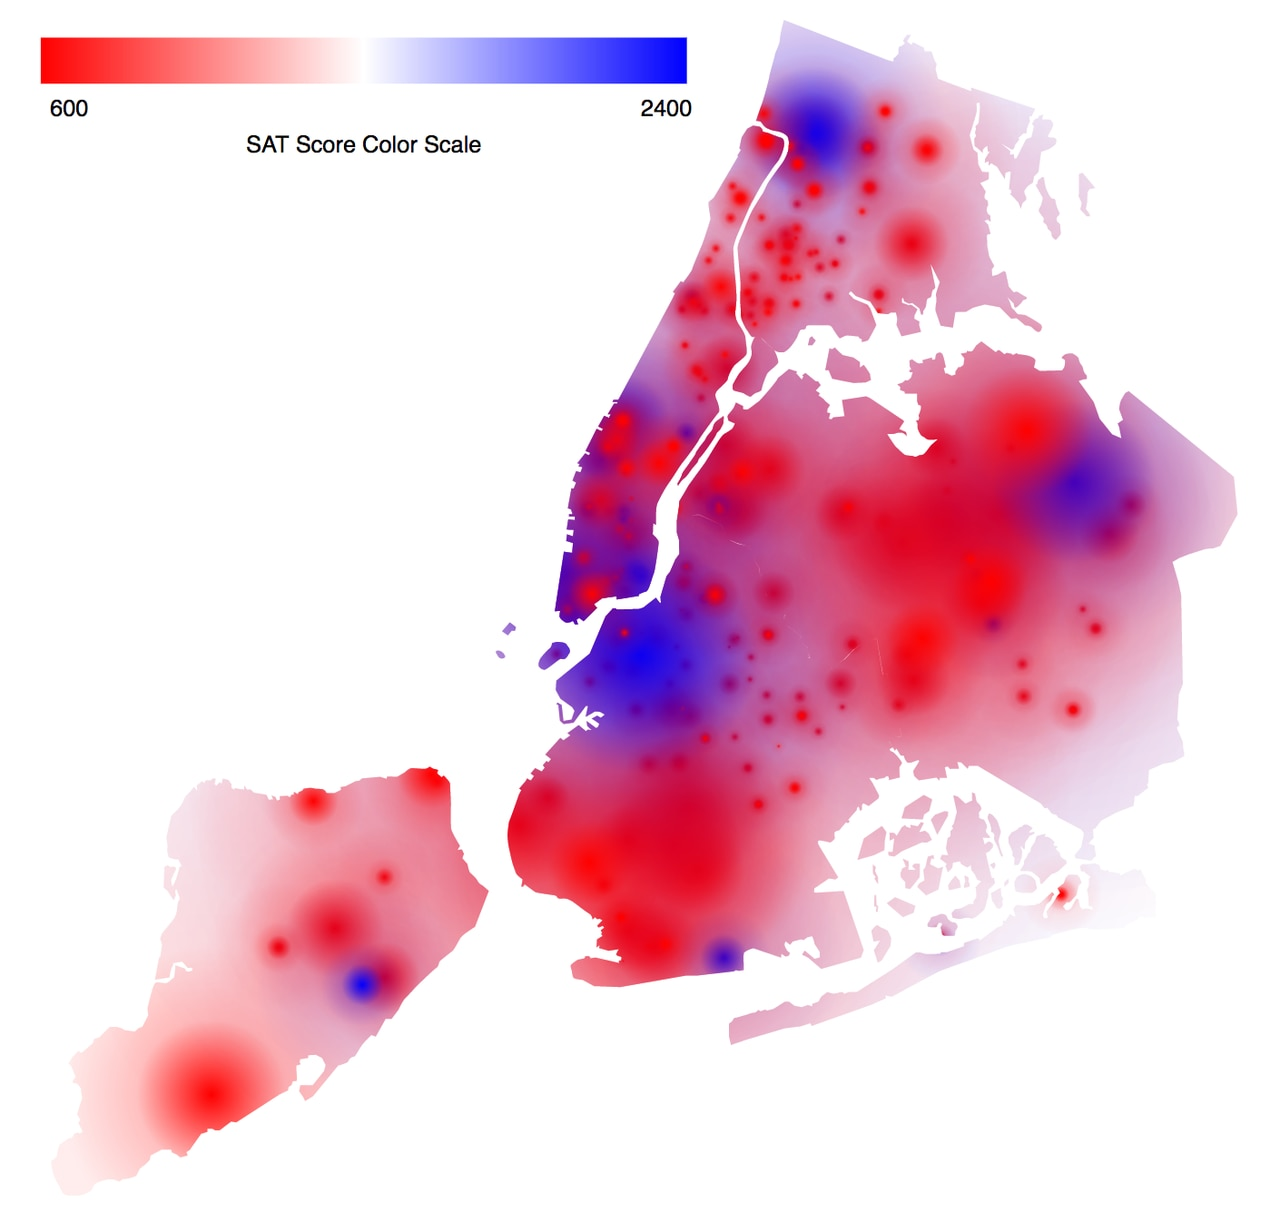 Check Out This Student s Cool Heat Map Of New York City SAT Scores 